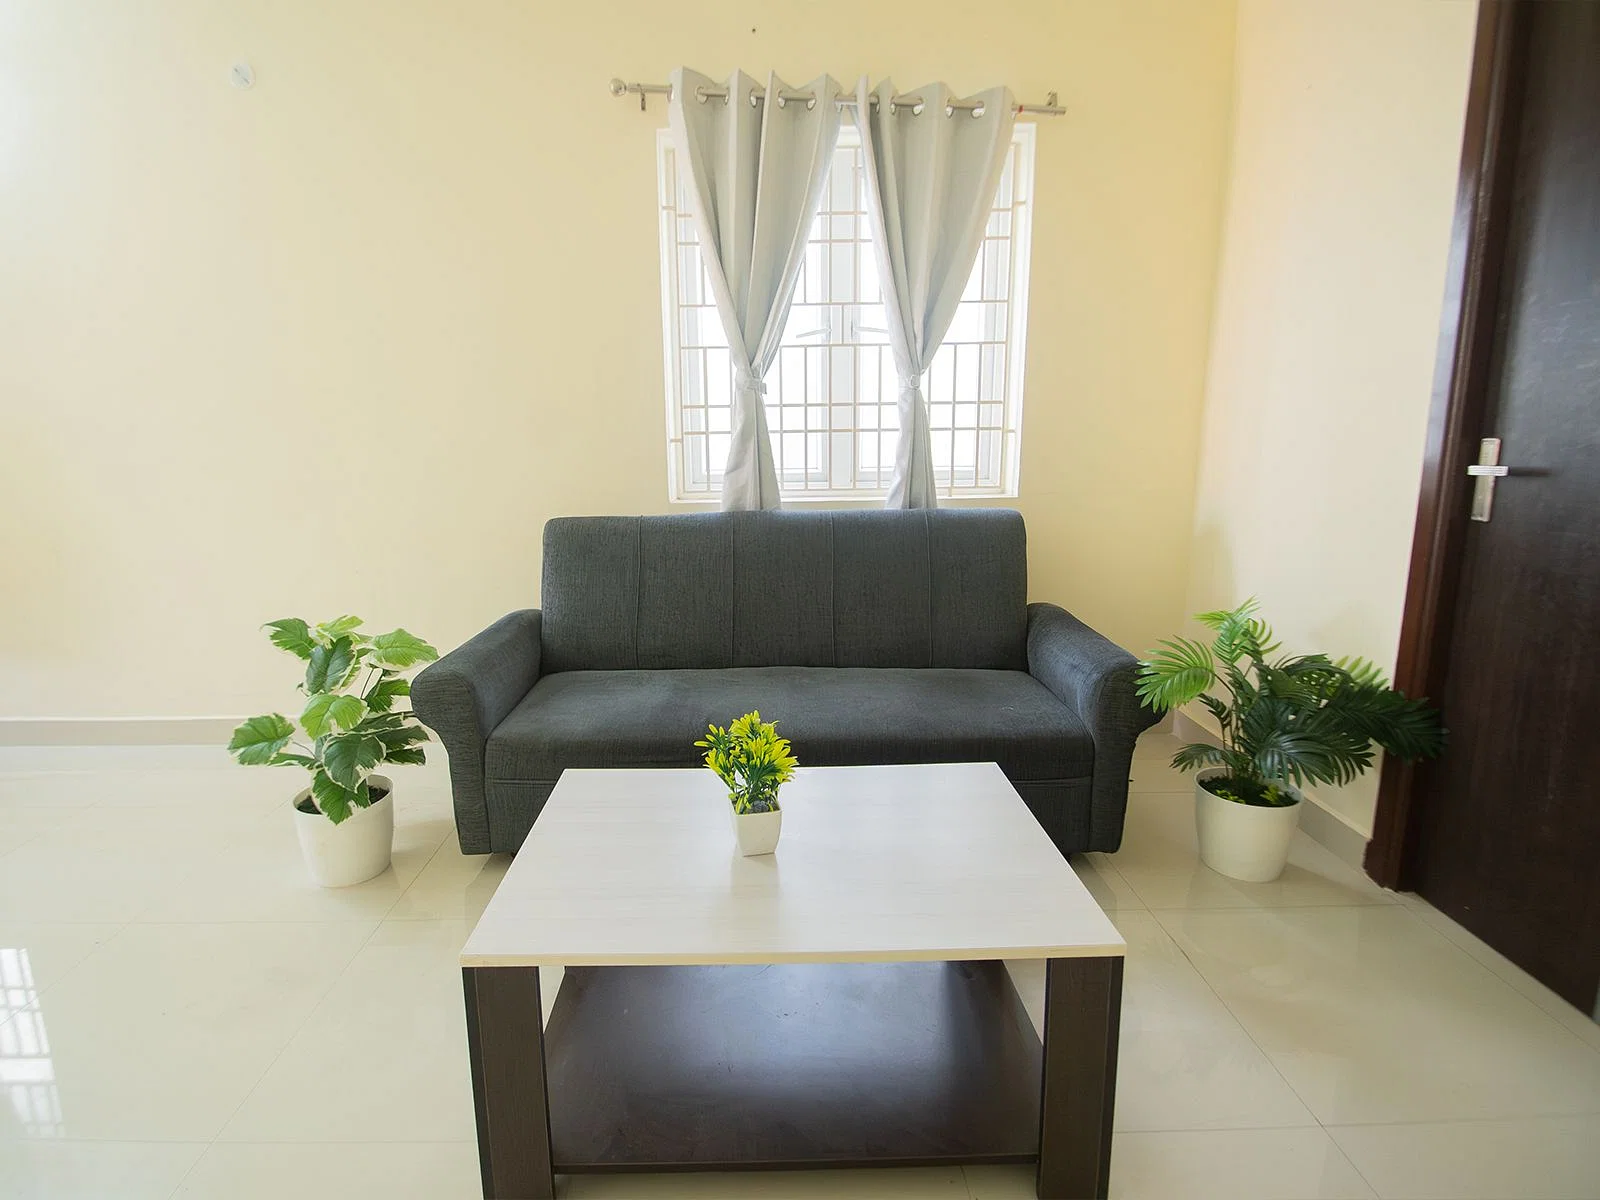 Affordable single rooms for students and working professionals in Padur-Chennai-Zolo Cyan